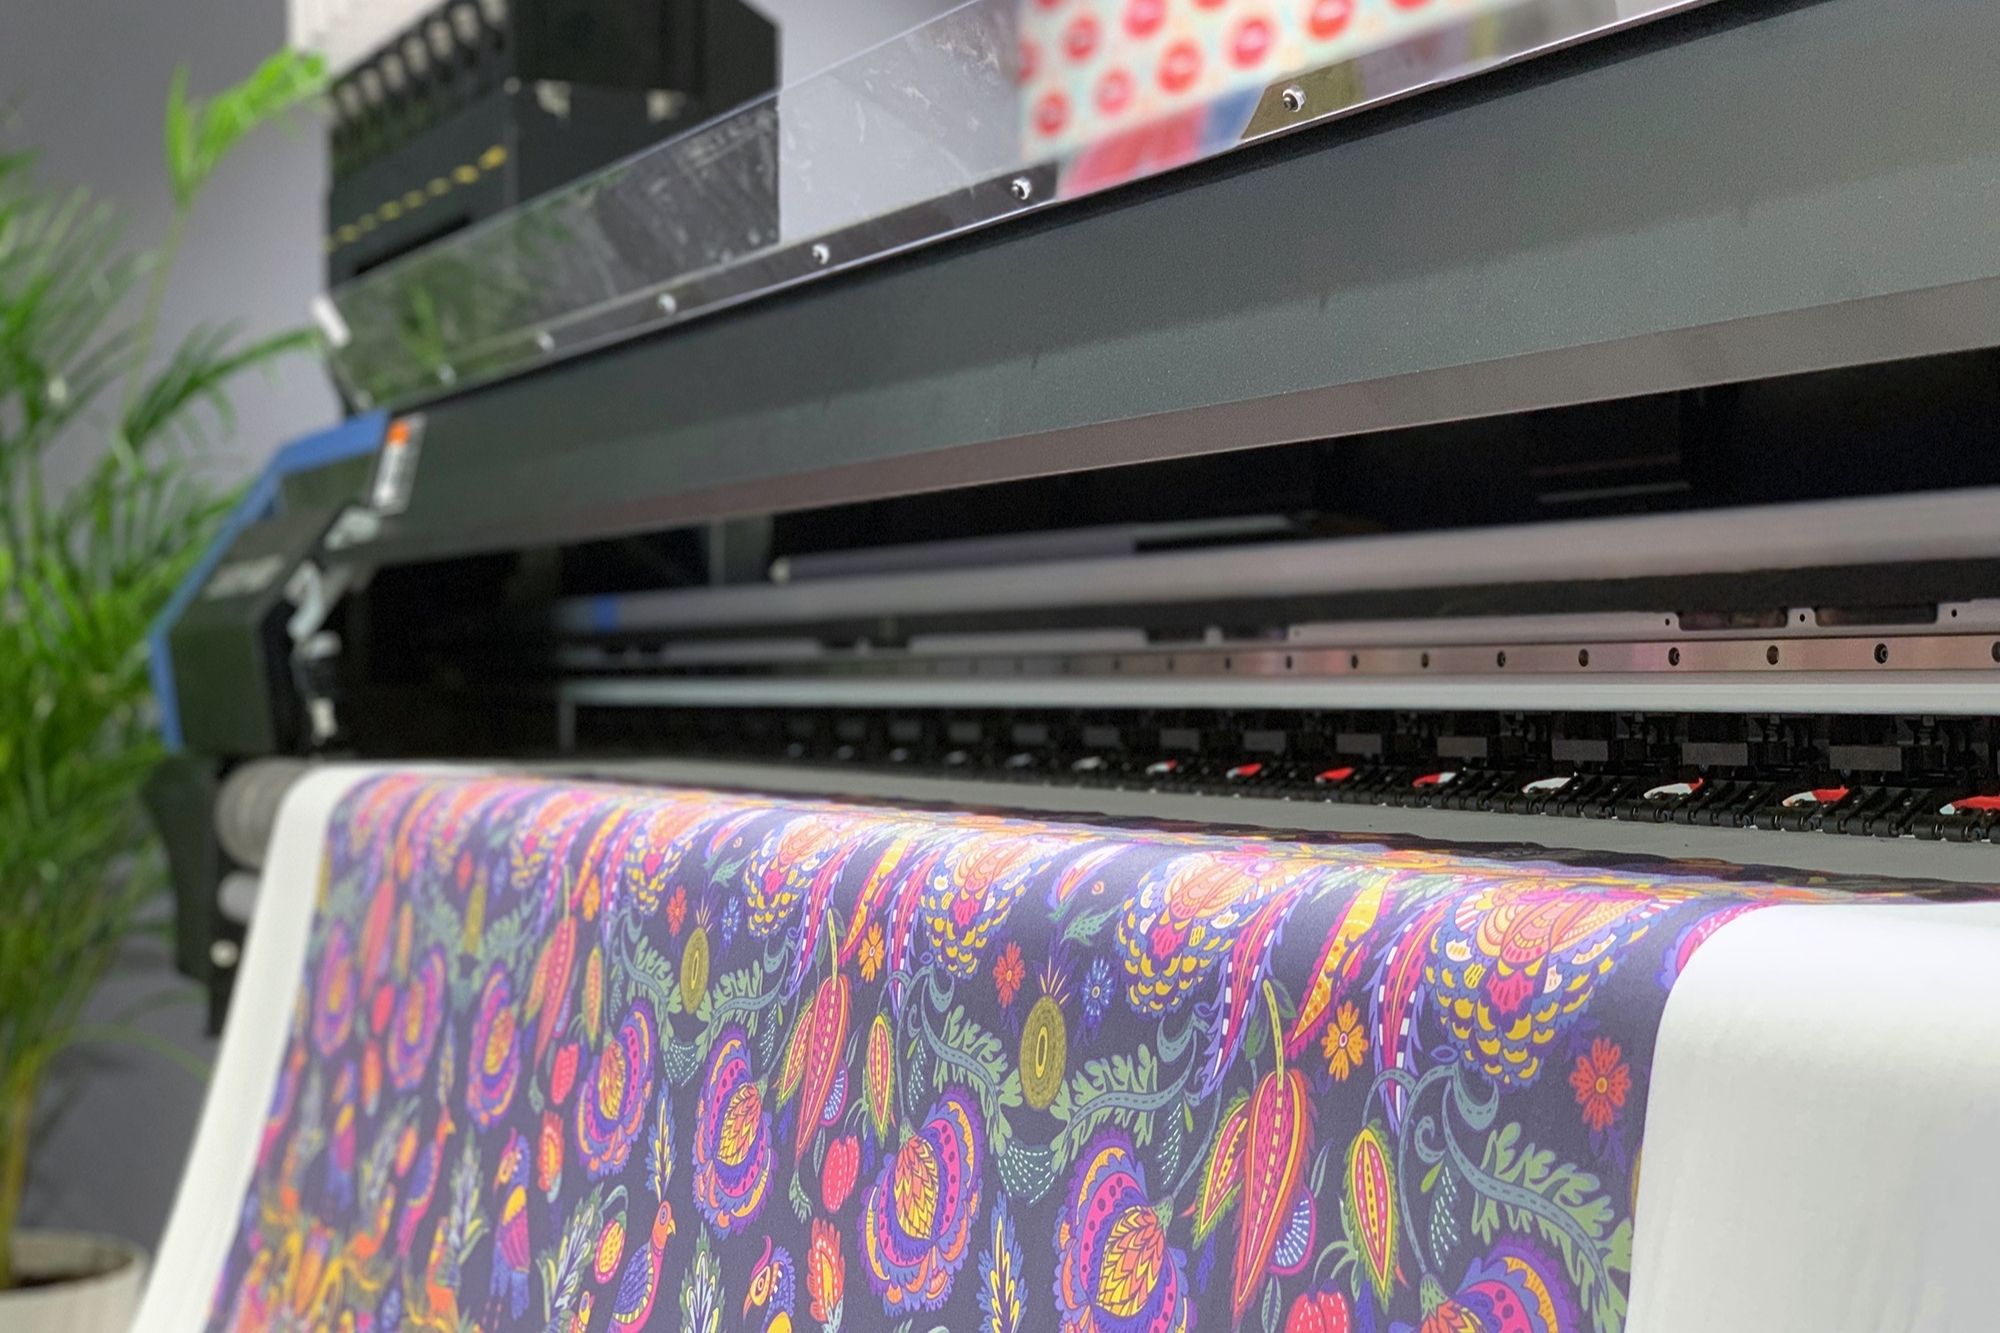 We also provide the highest quality sublimation printing services in Dubai, UAE.